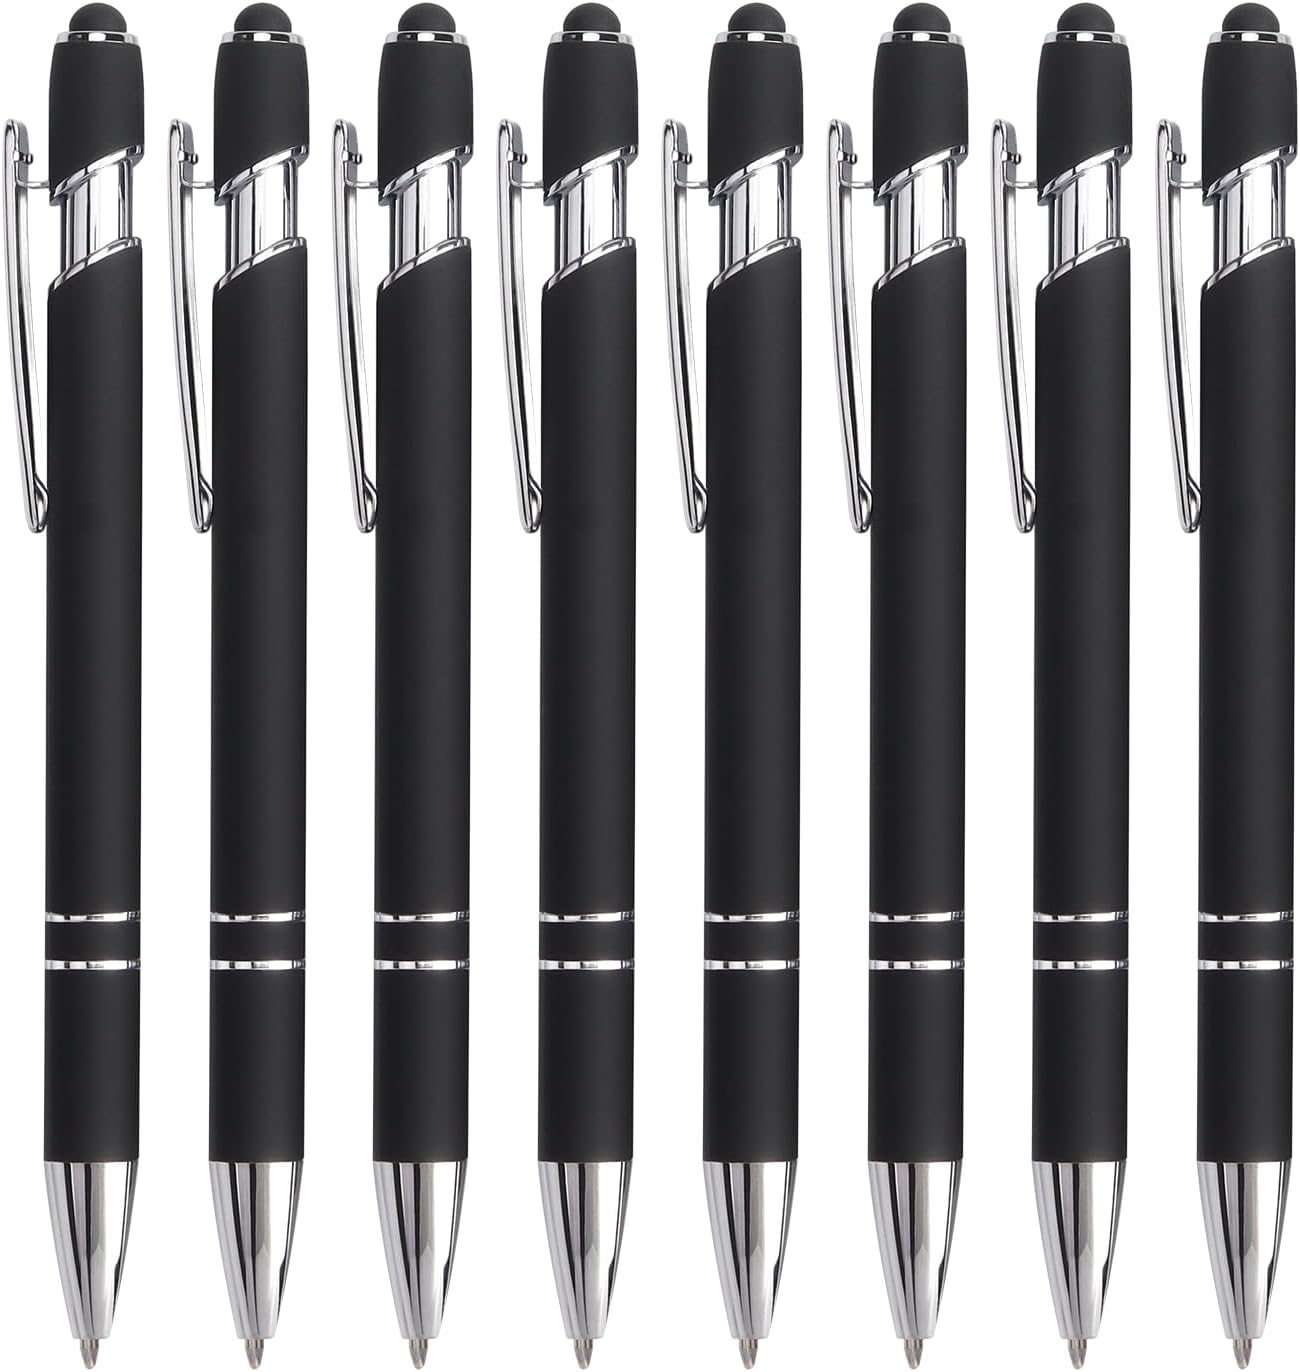 2-in-1 Stylus Retractable Ballpoint Pen with Stylus Tip,1.0mm Black Ink